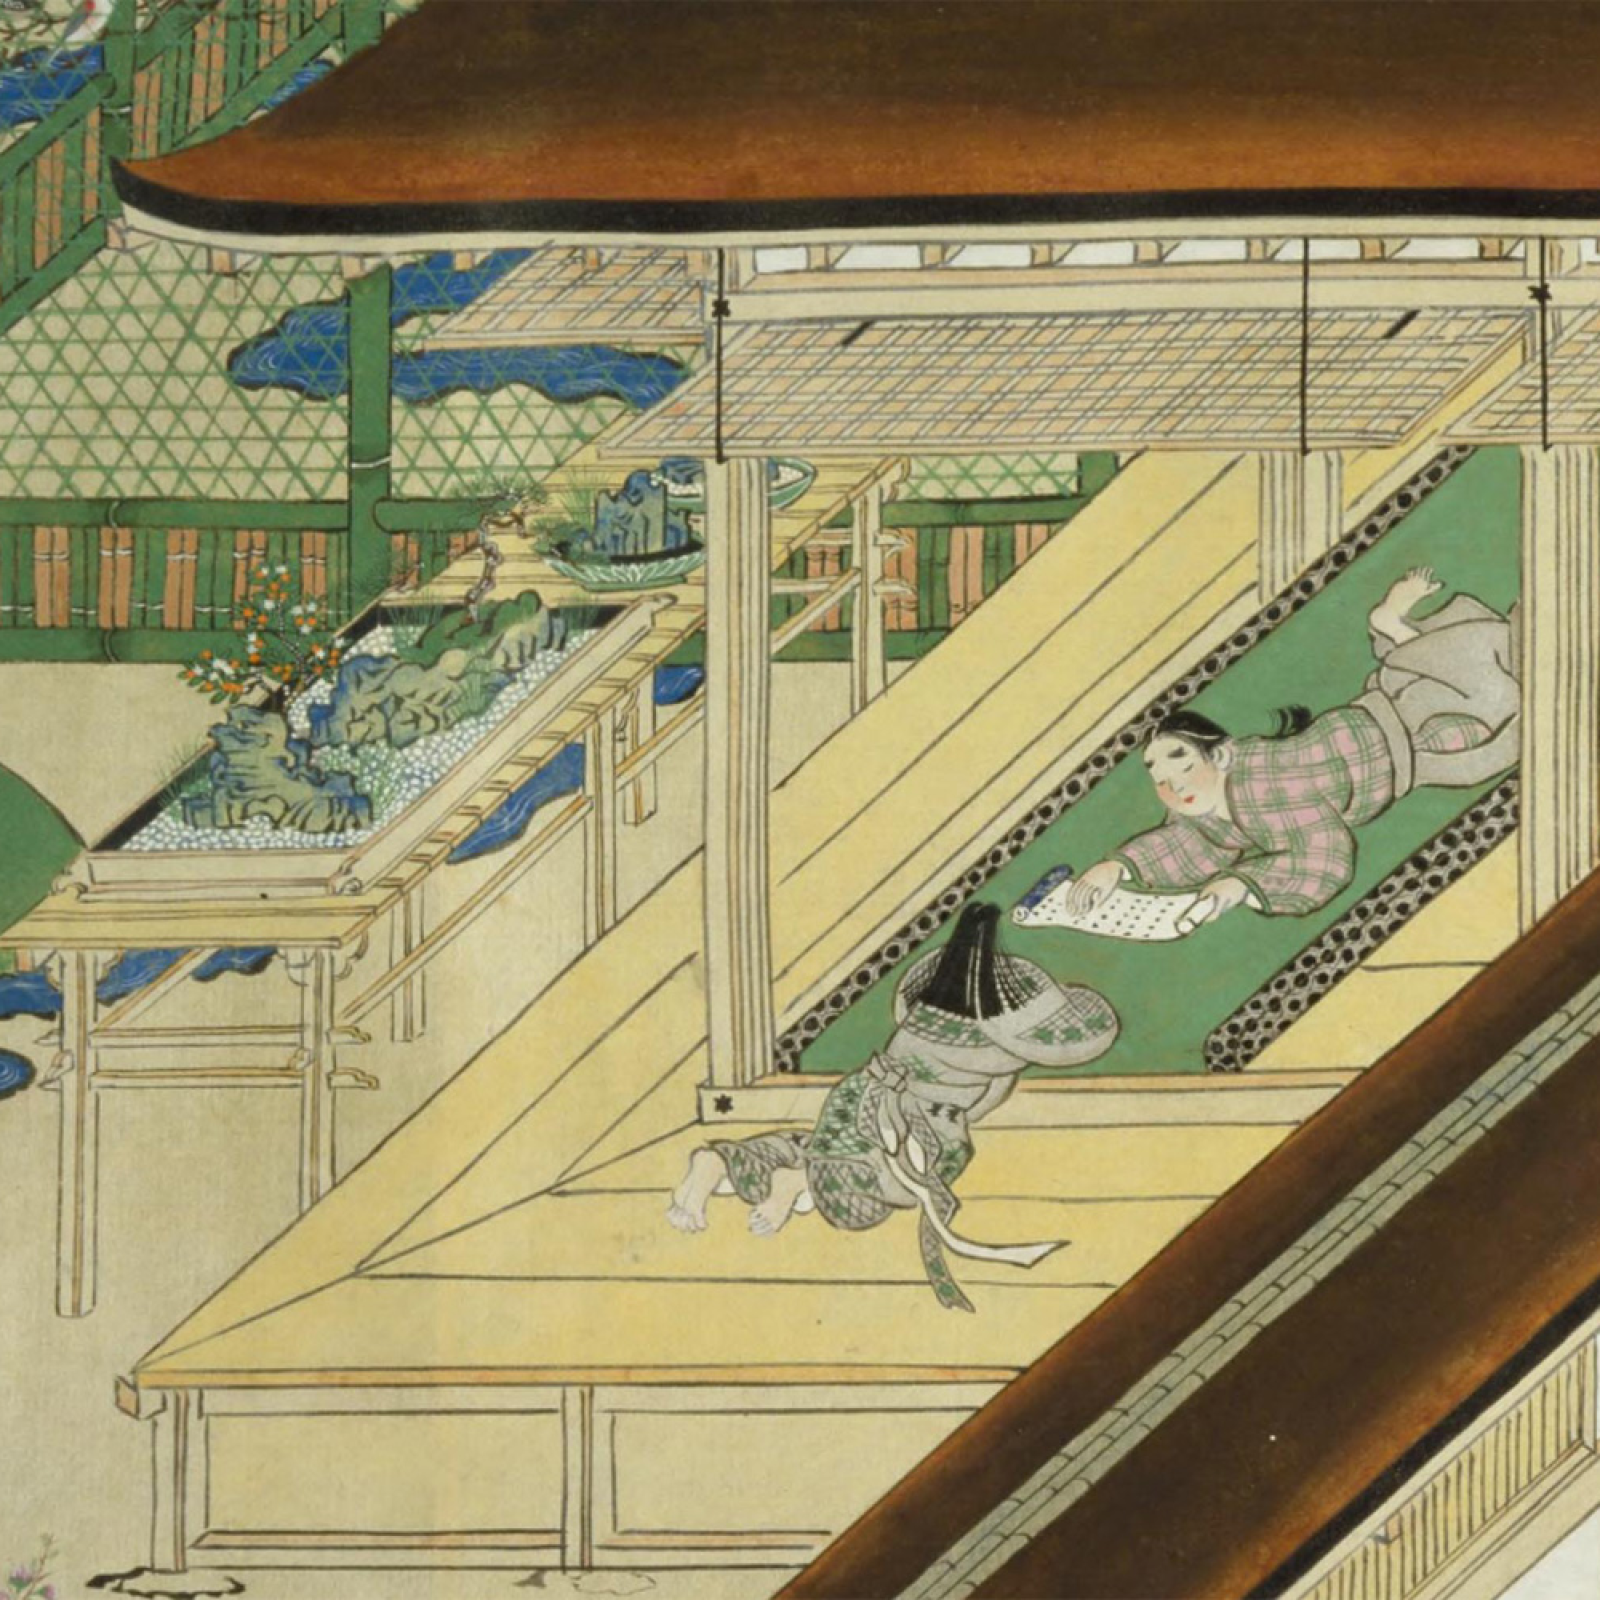 Detail of a Japanese scroll showing bonsai around 1100 A.D.